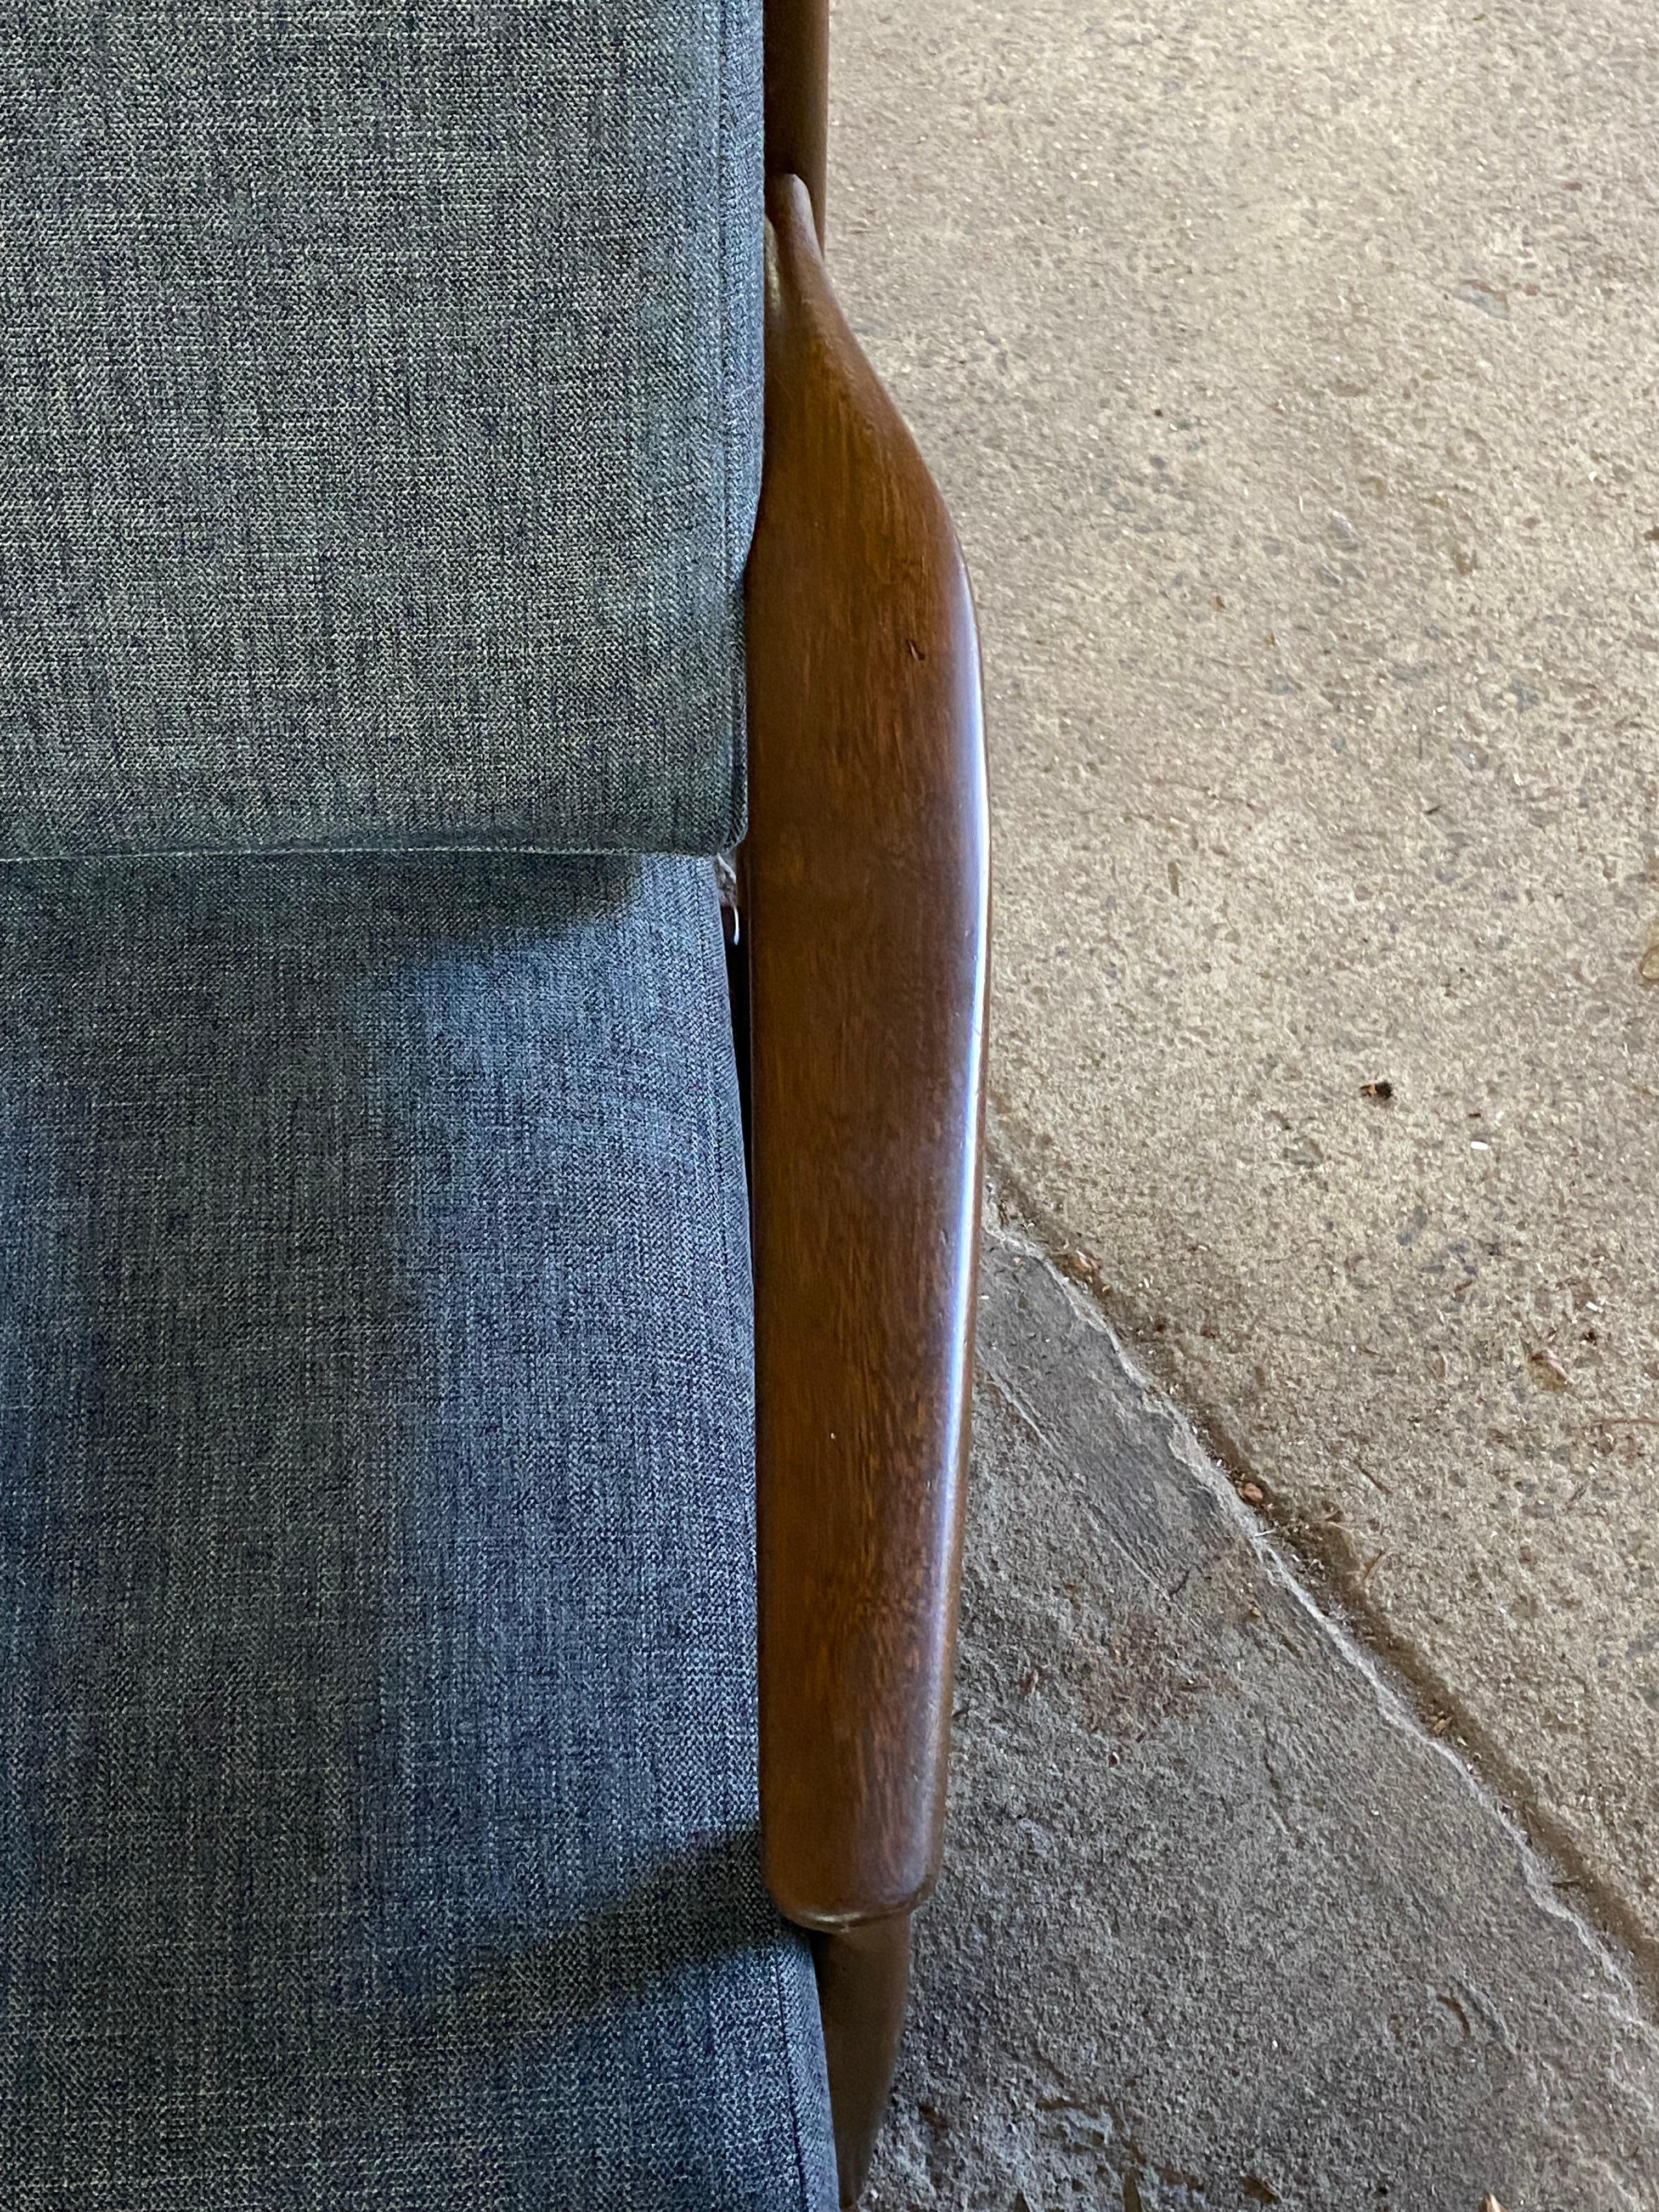 Viko Baumritter Mid-Century Modern Spindle Back Armchair In Good Condition For Sale In Garnerville, NY